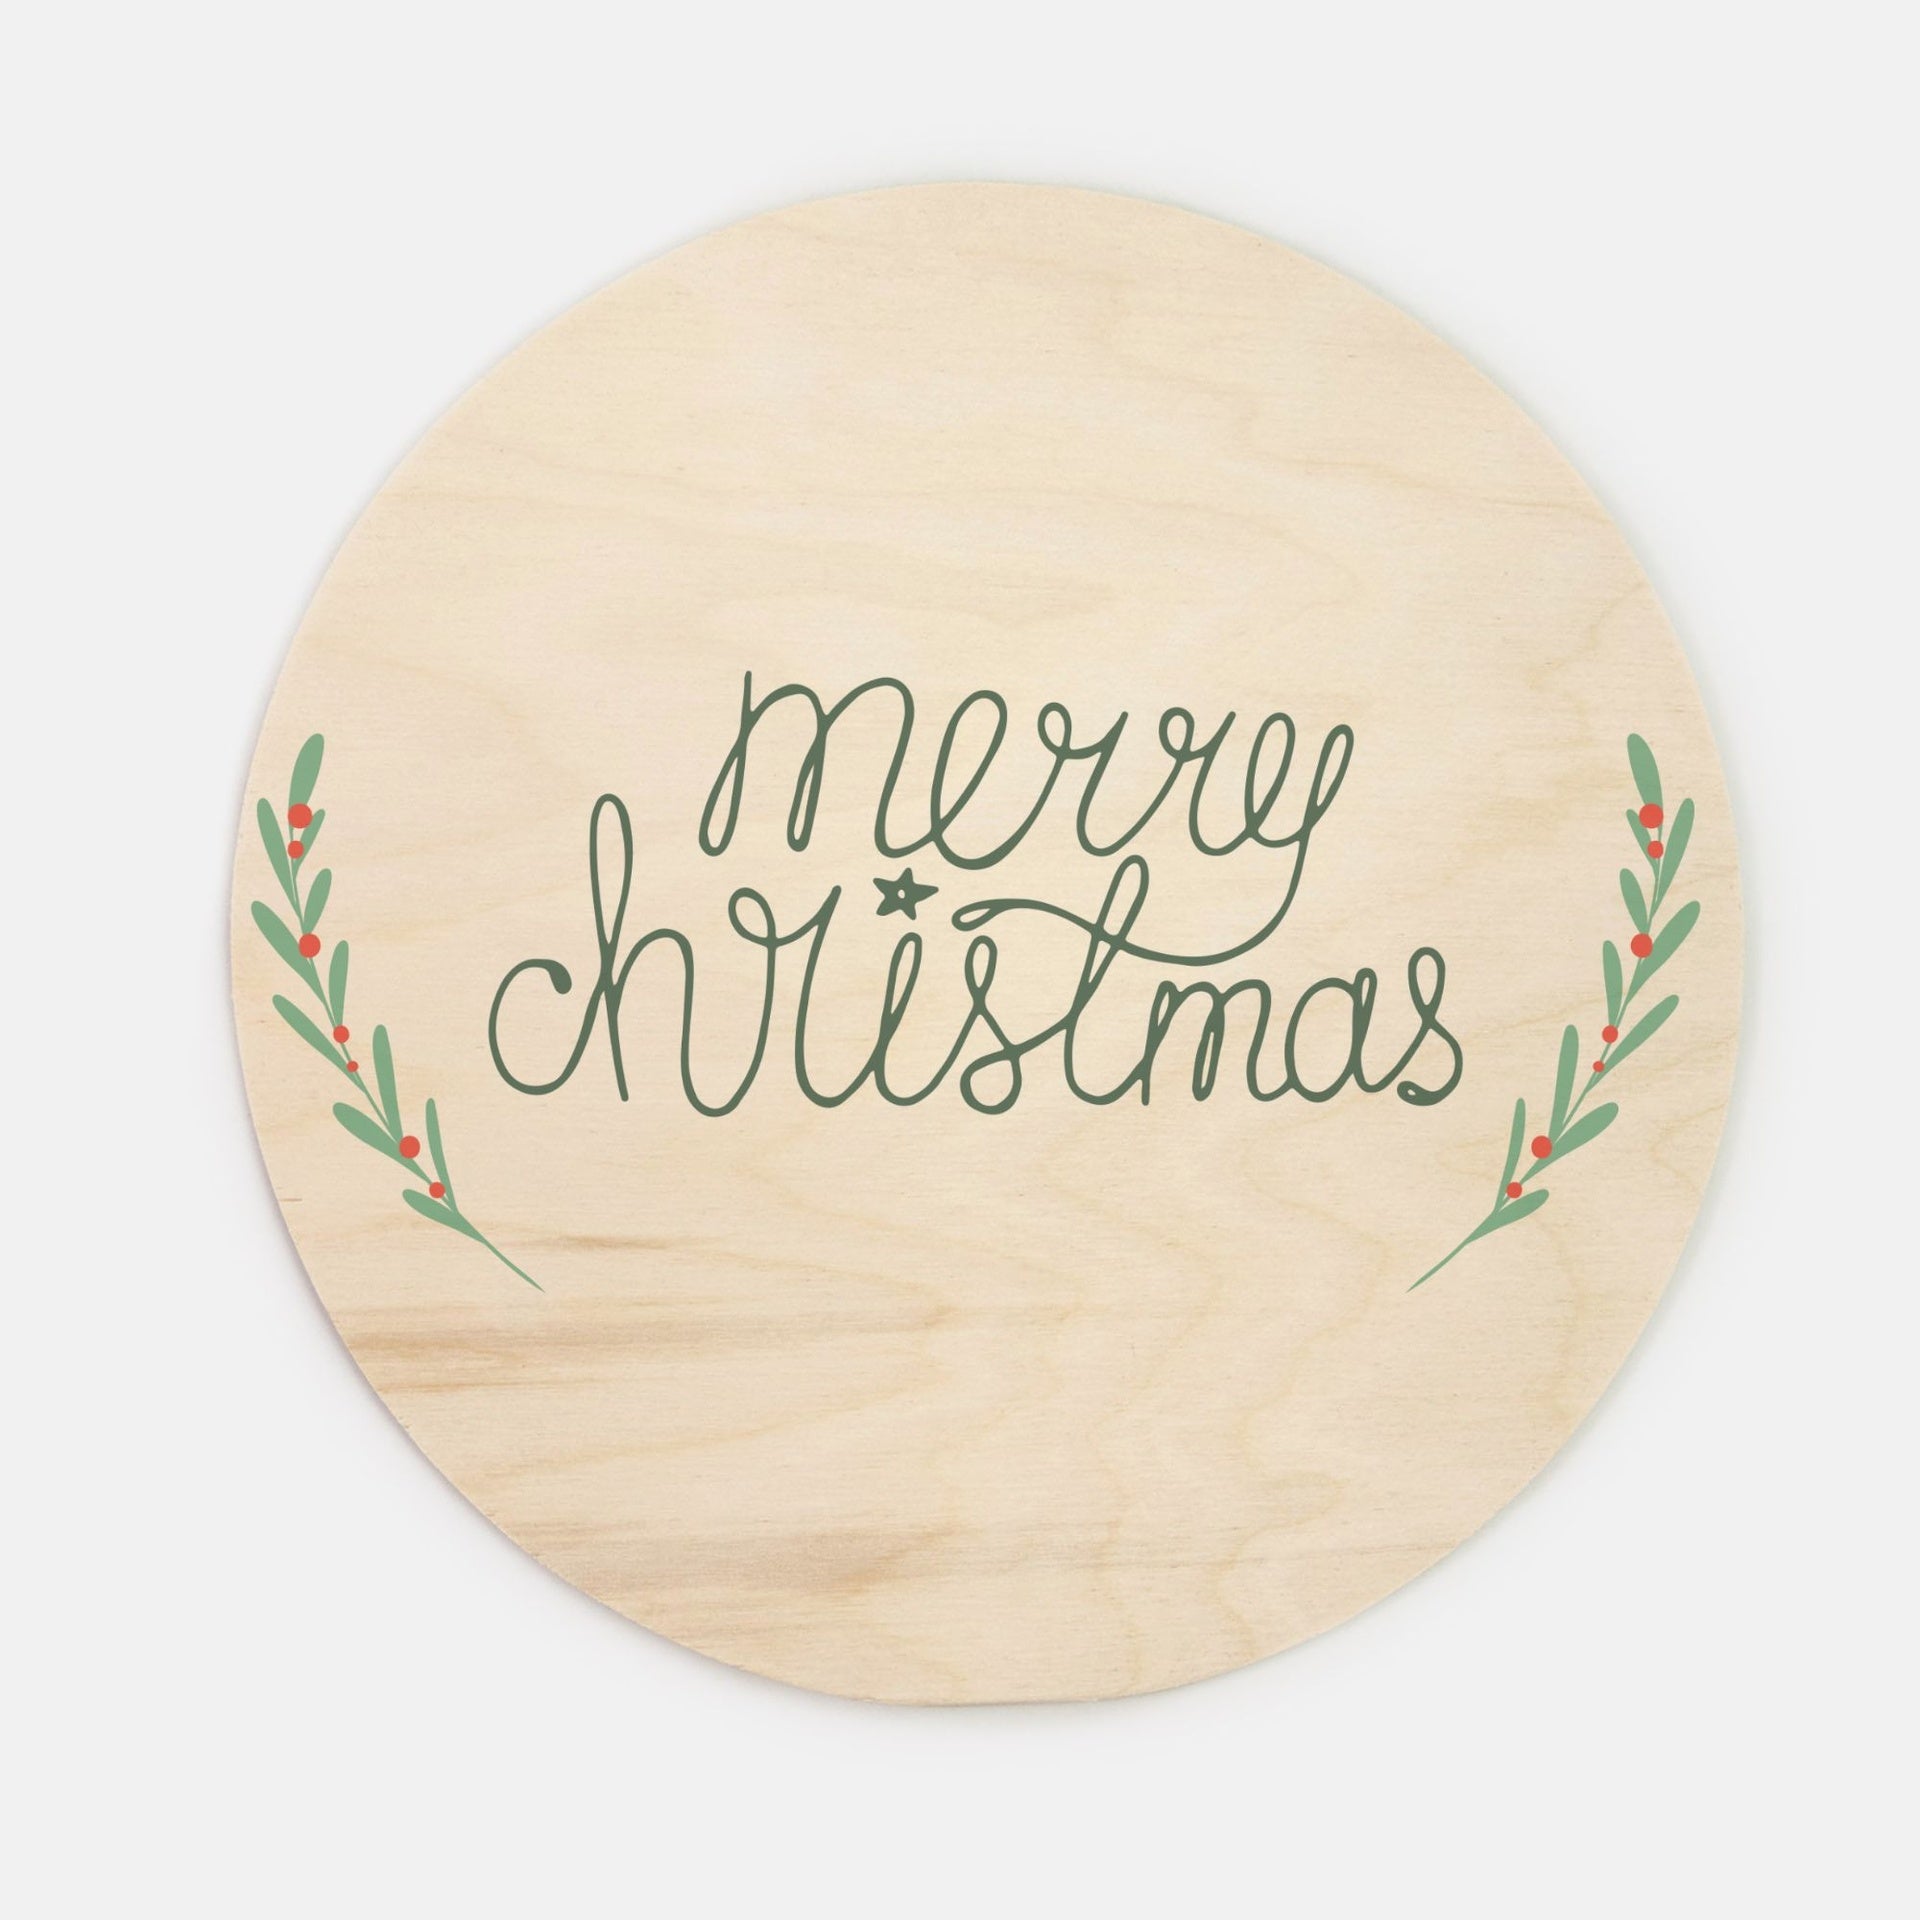 10" Round Wood Sign - Merry Christmas